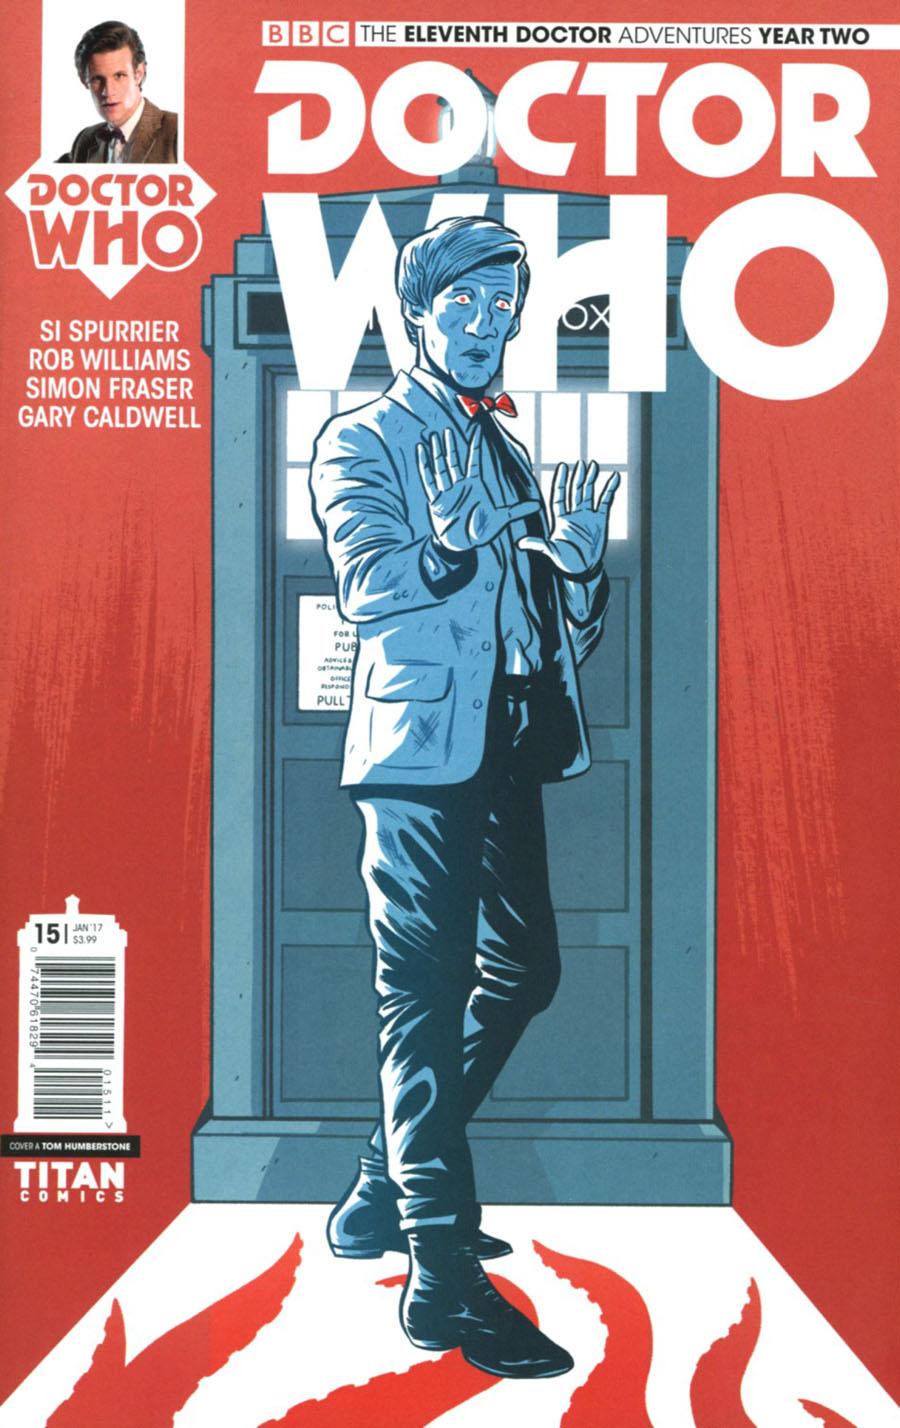 Doctor Who 11th Doctor Year Two Vol. 1 #15